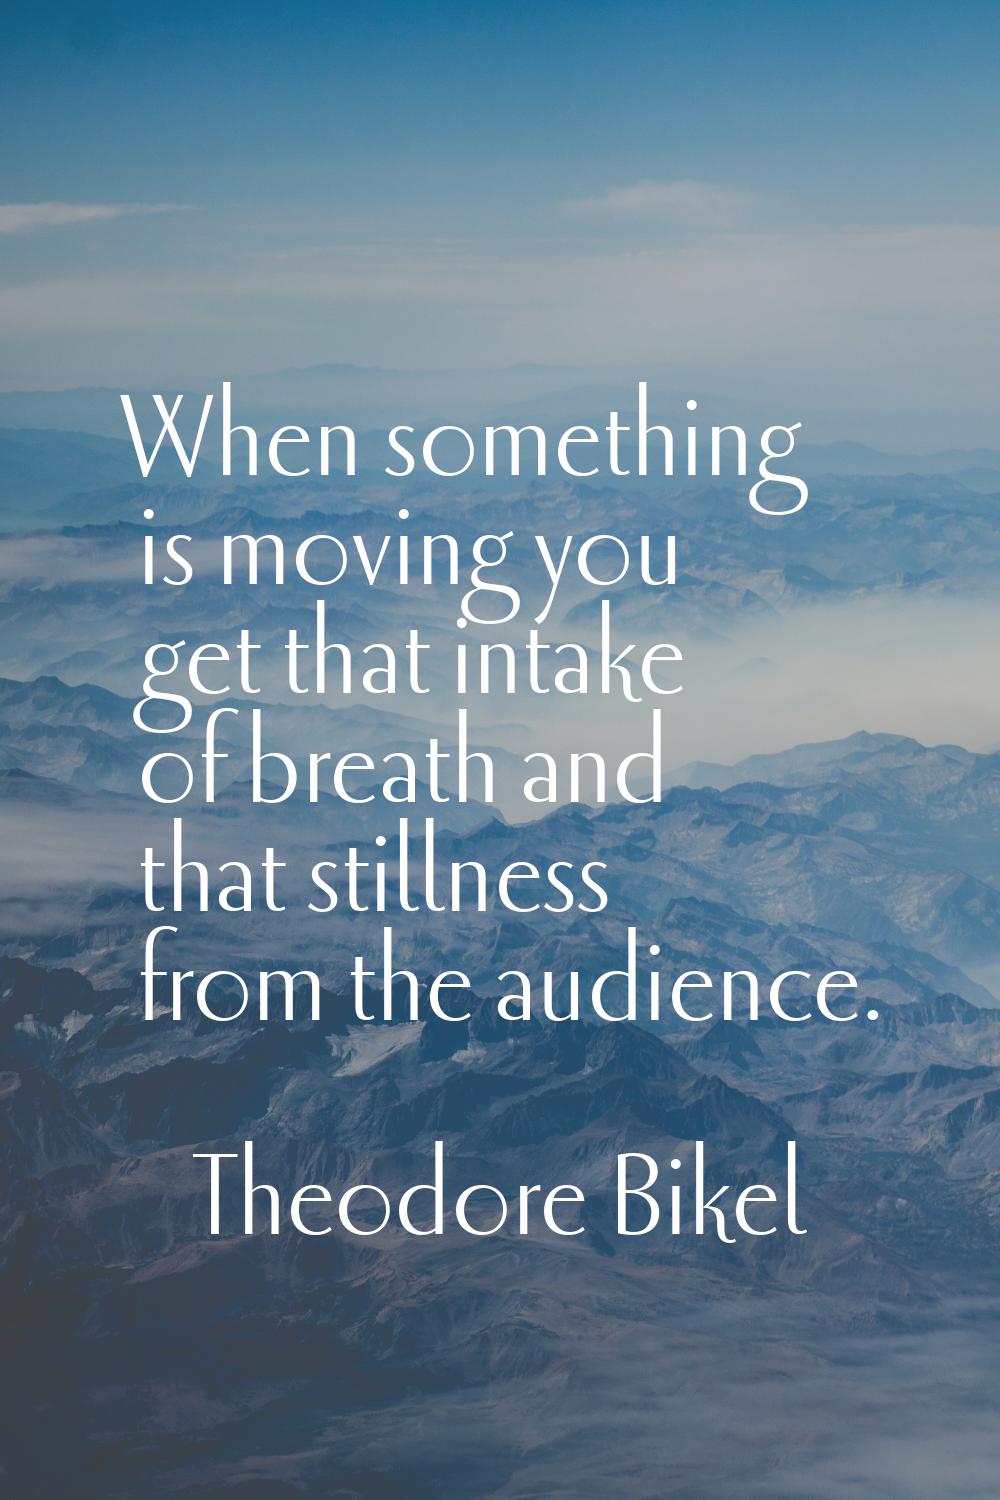 When something is moving you get that intake of breath and that stillness from the audience.